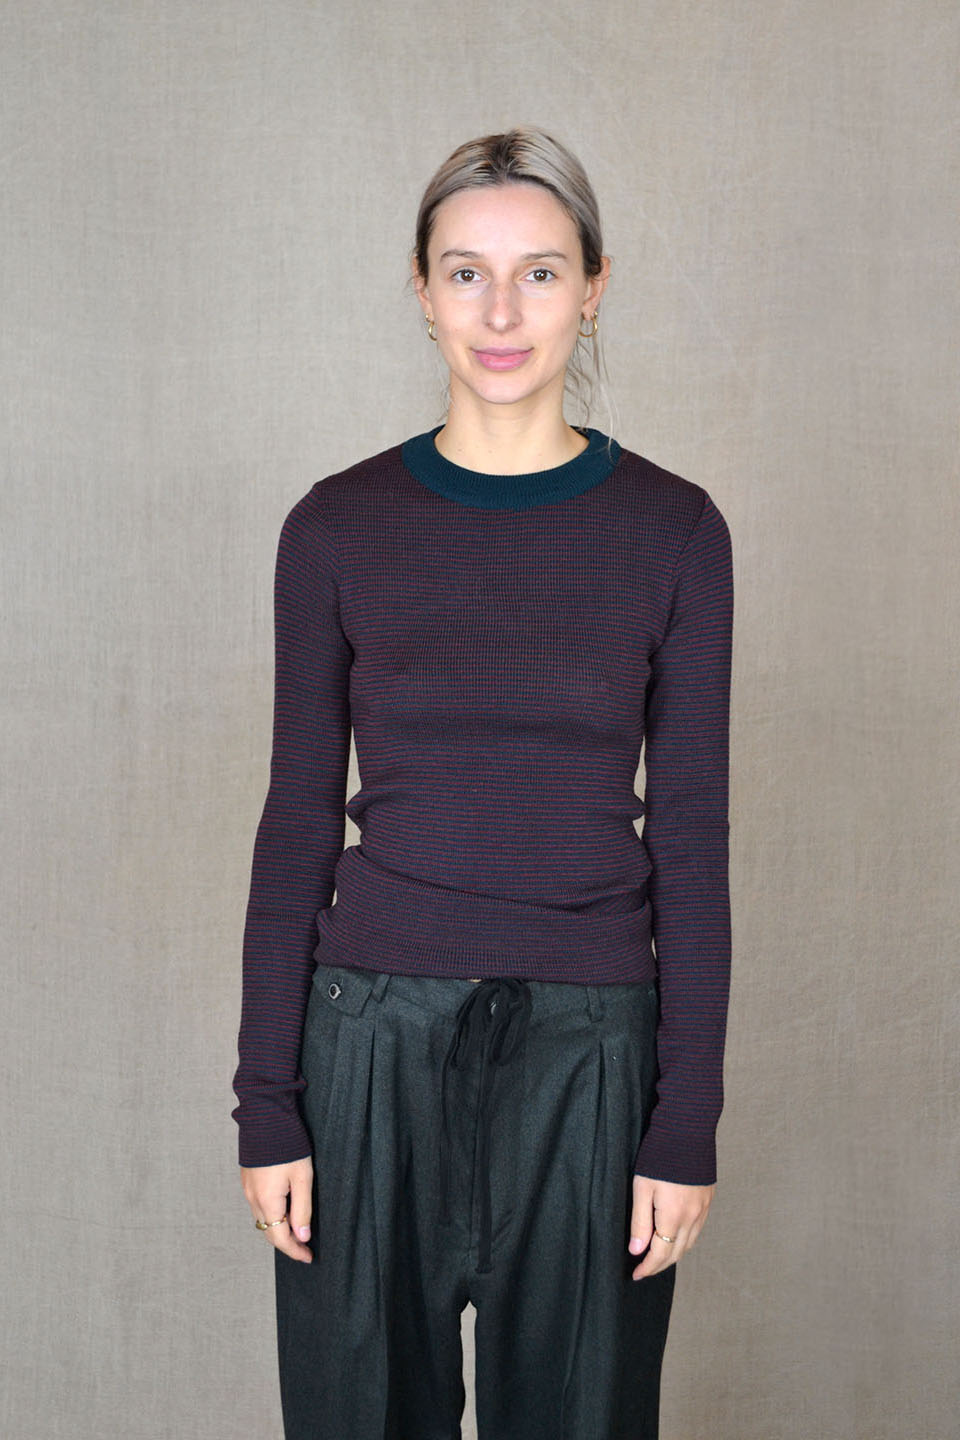 Alpha Roundneck Sweater in Burgundy and Green